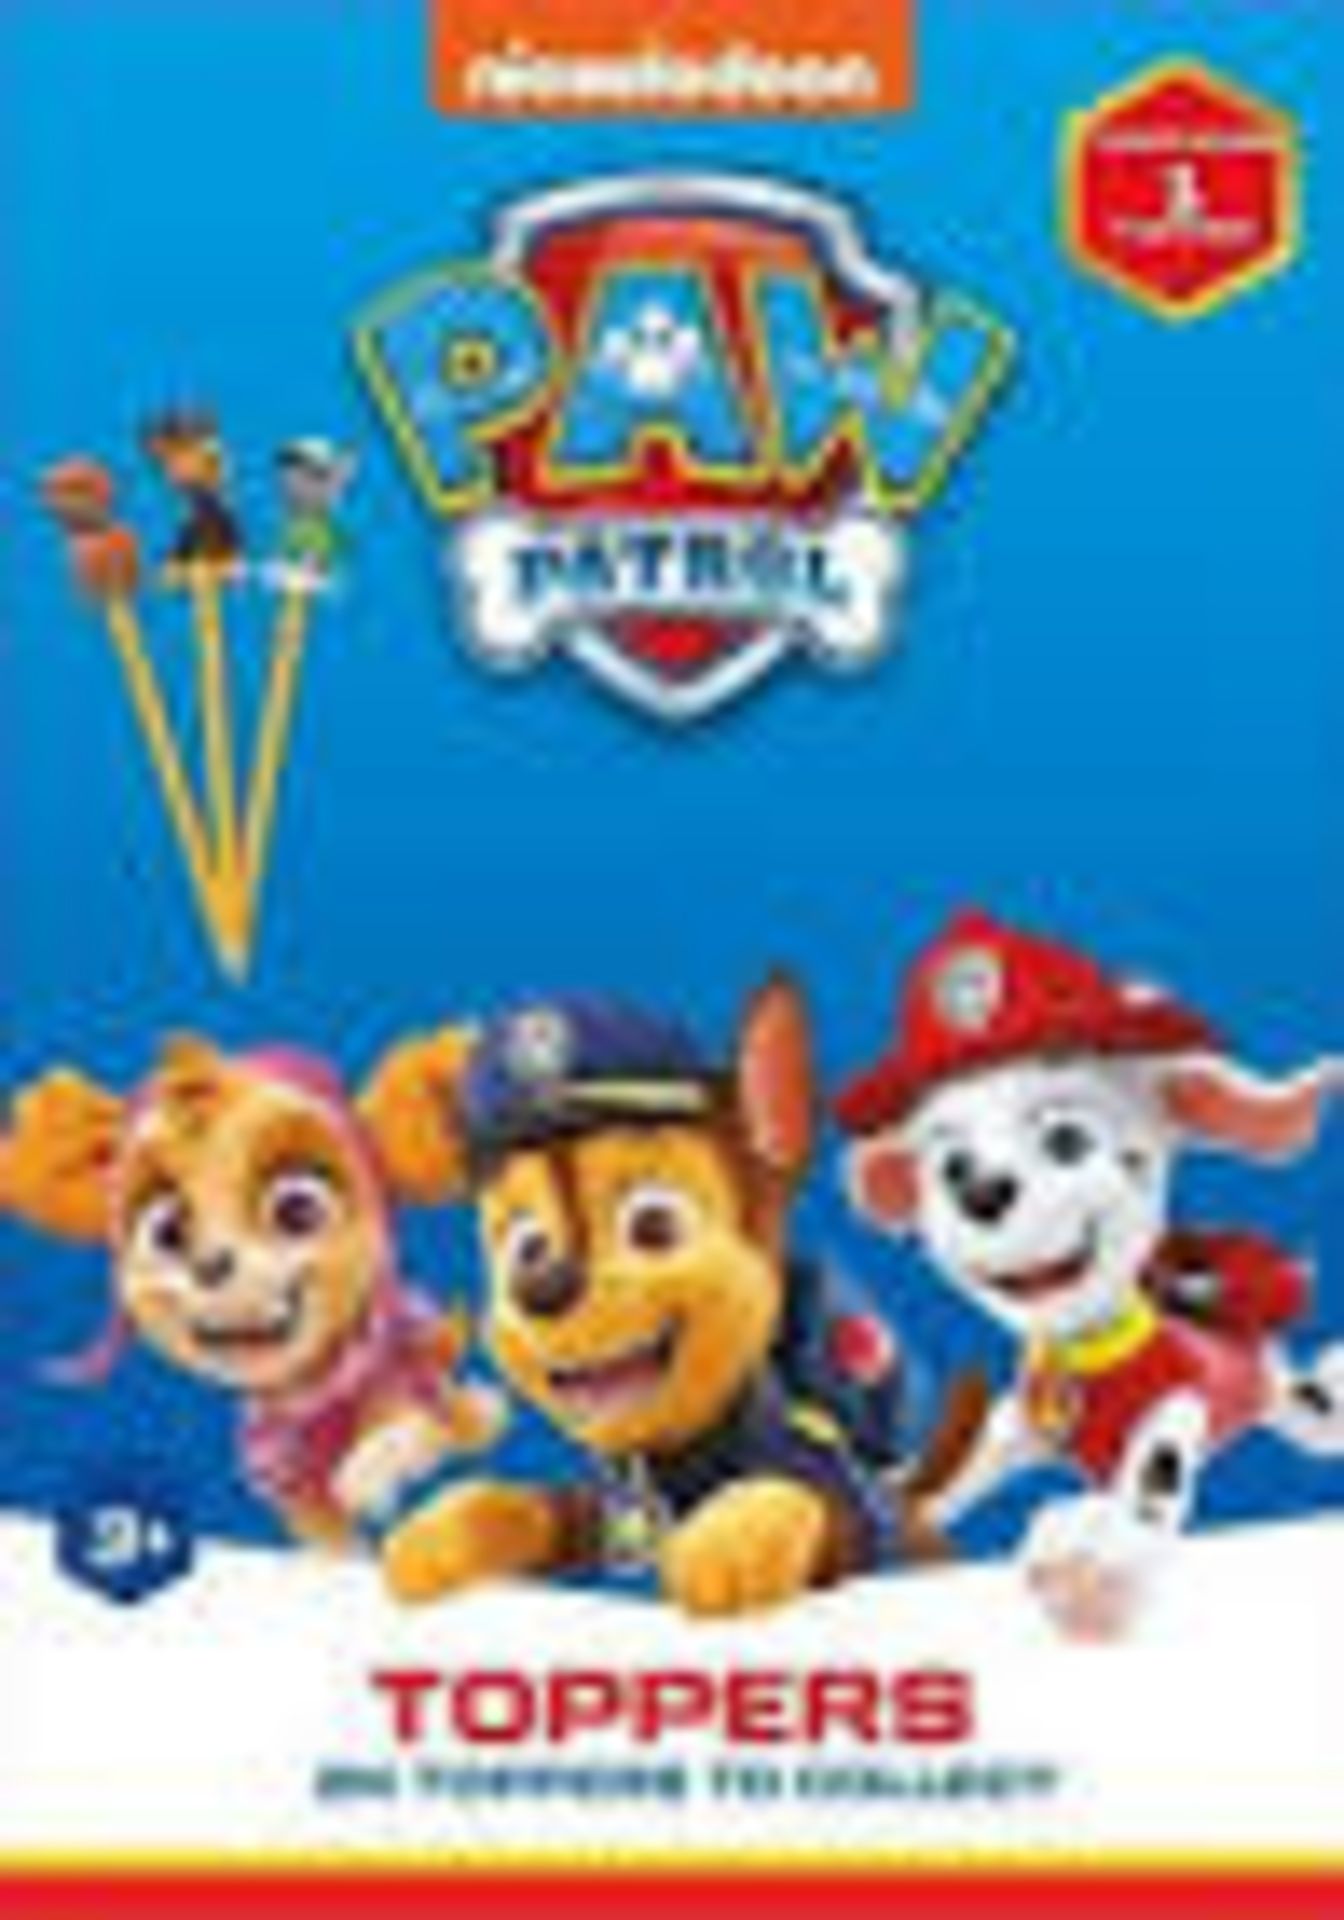 100 x Paw Patrol Toppers/Stamper Sets - Image 4 of 6